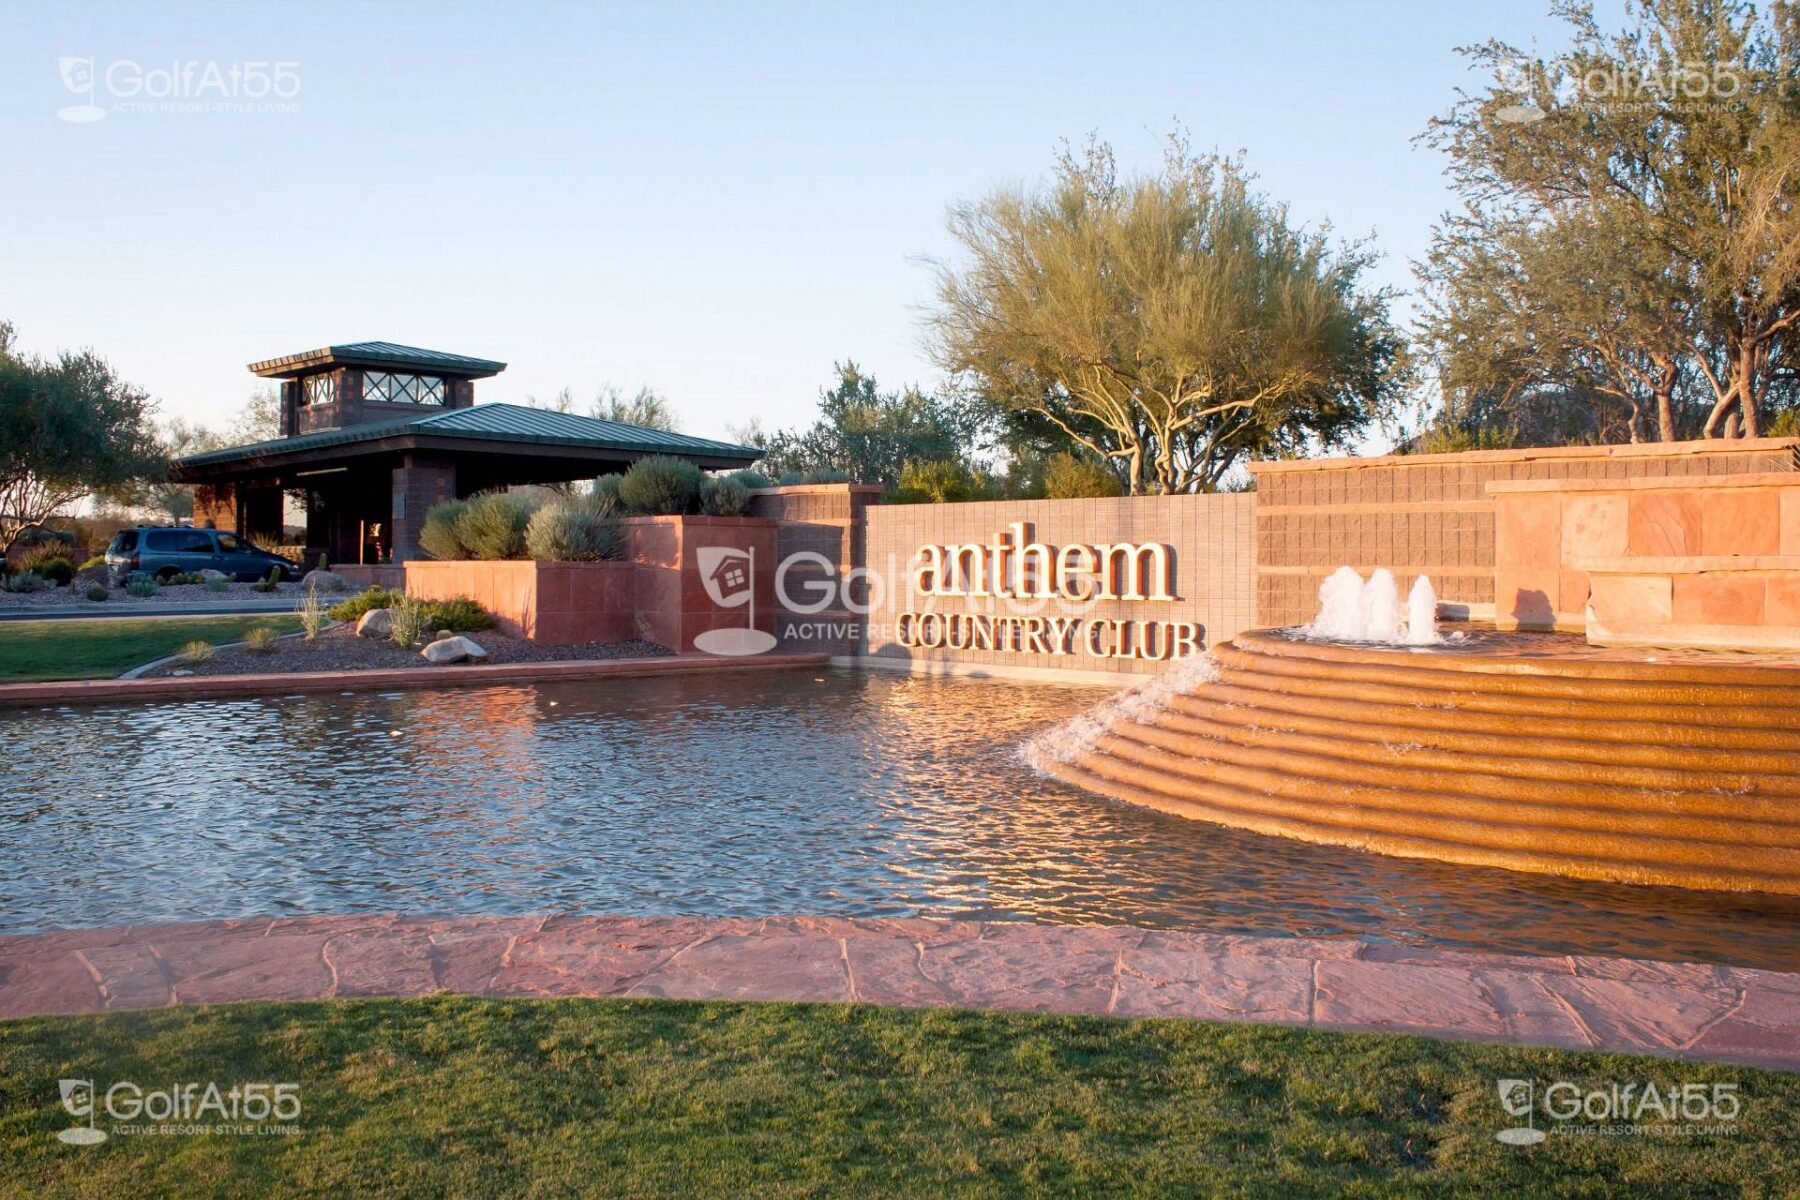 Anthem Country Club, entrance